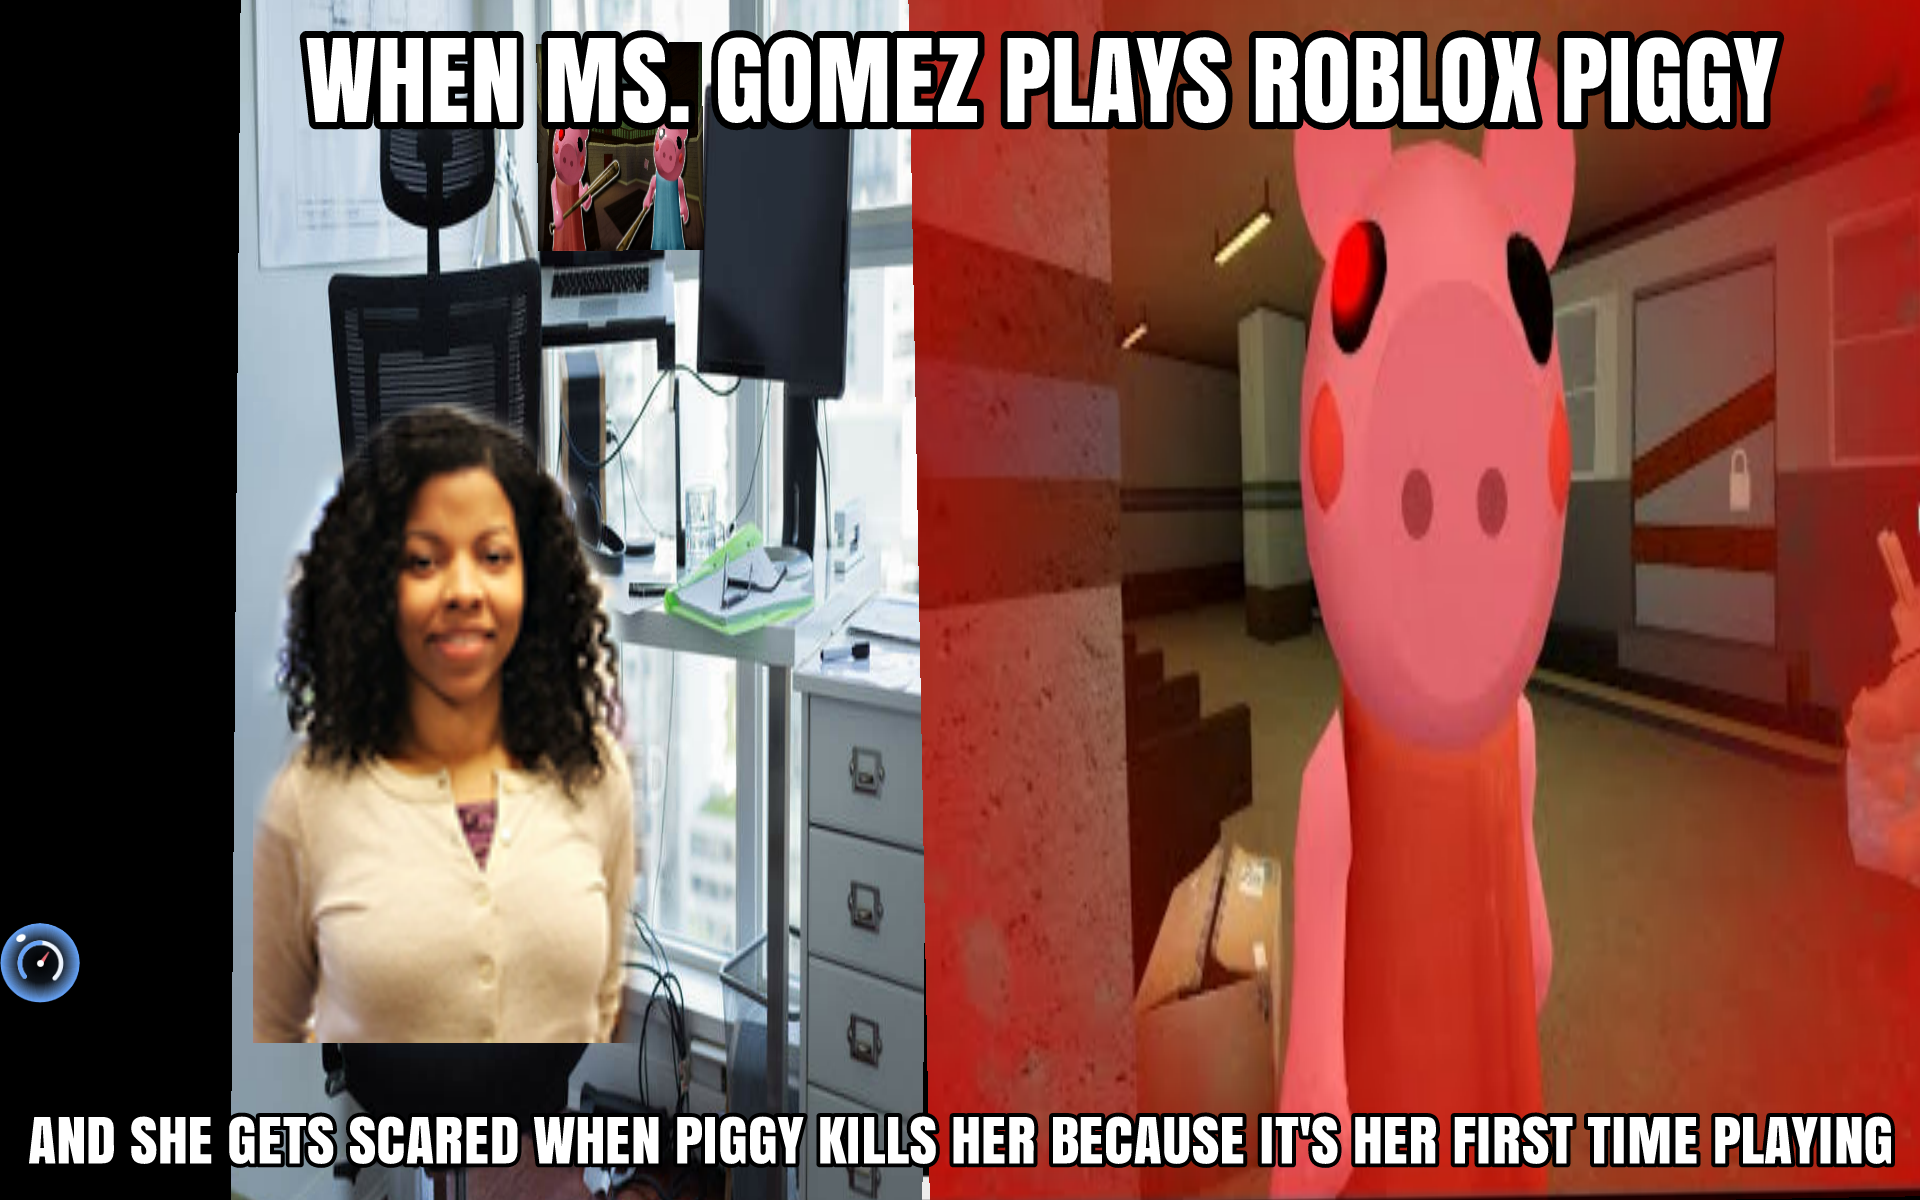 Ms. Gomez playing Roblox Piggy for the first time Meme Generator - Imgflip